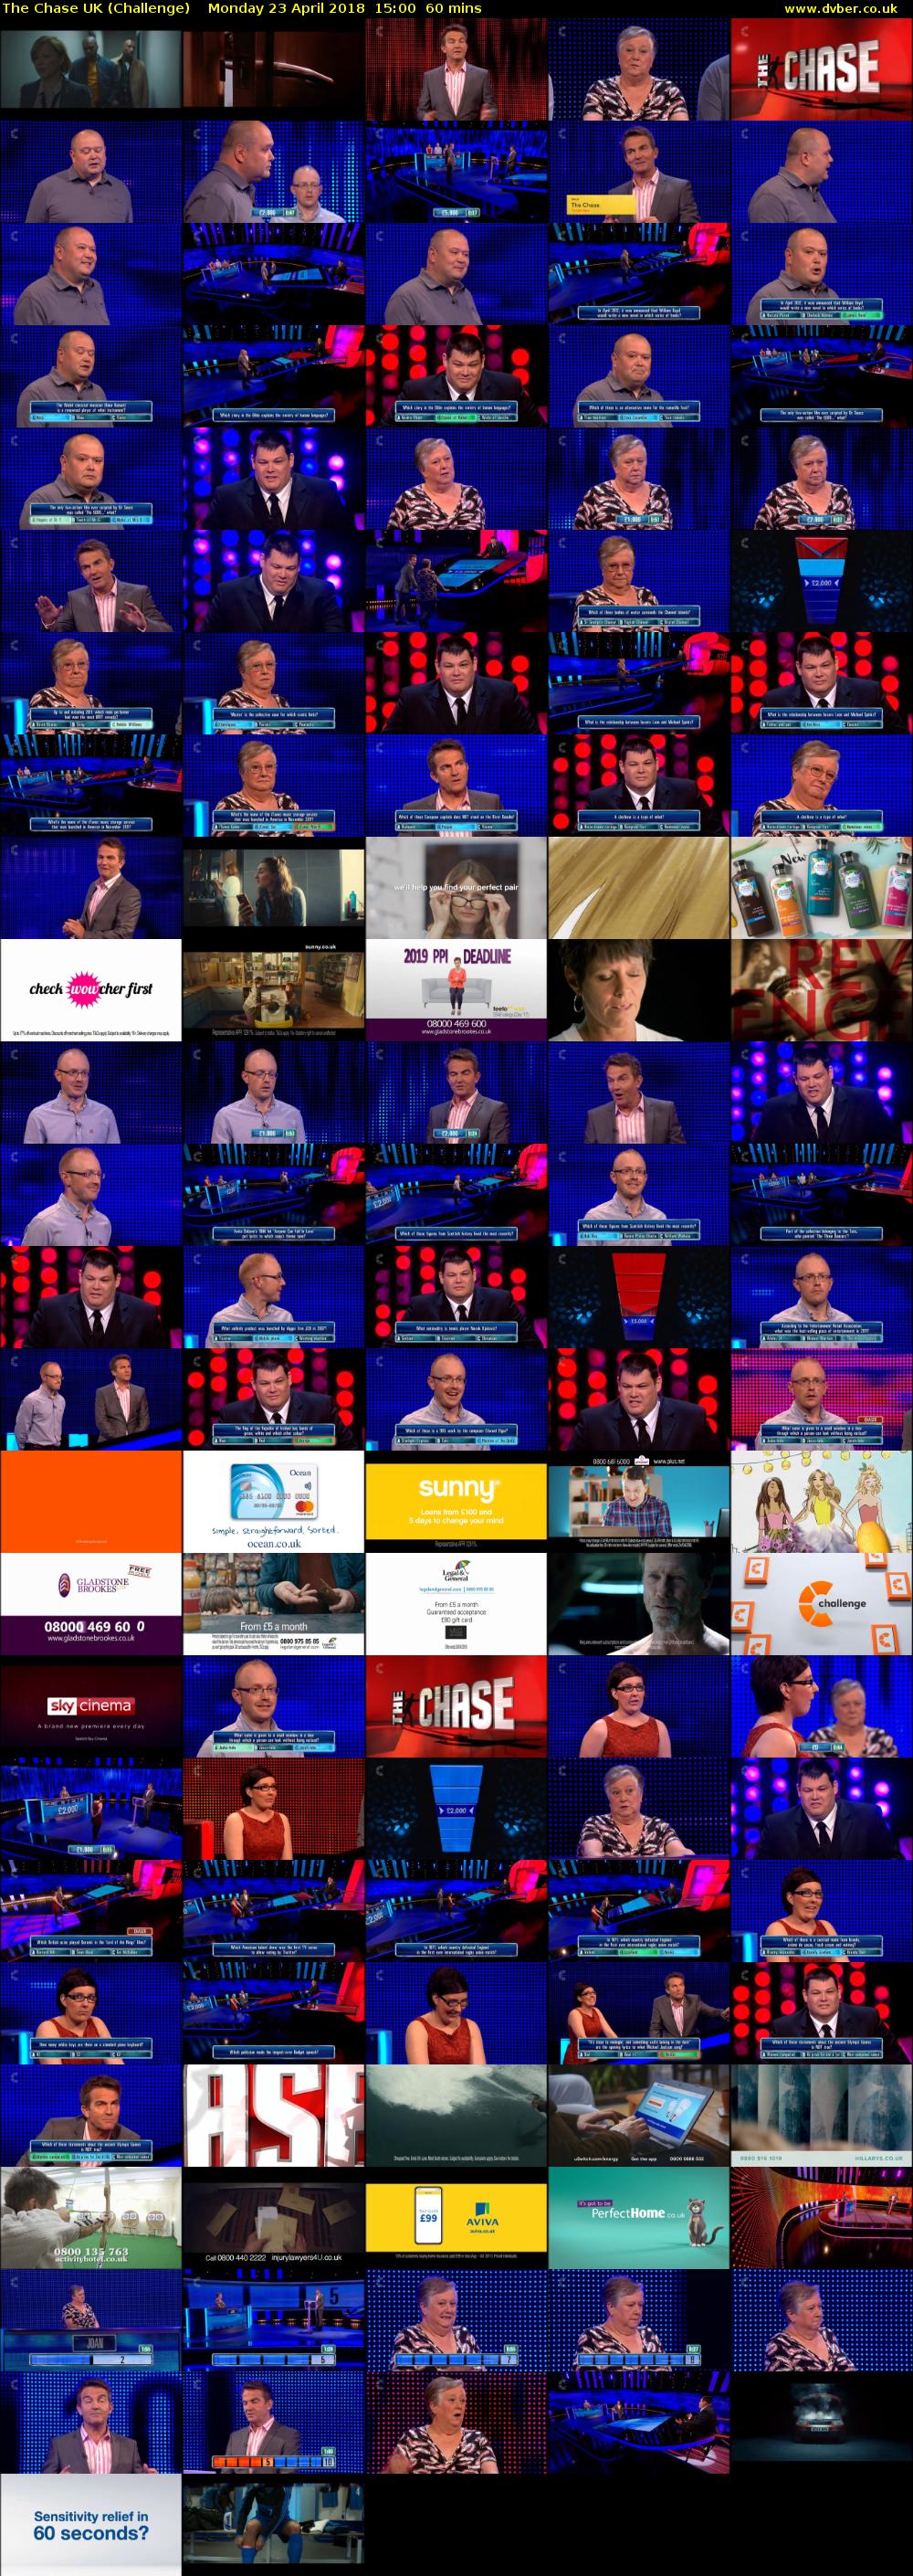 The Chase UK (Challenge) Monday 23 April 2018 15:00 - 16:00